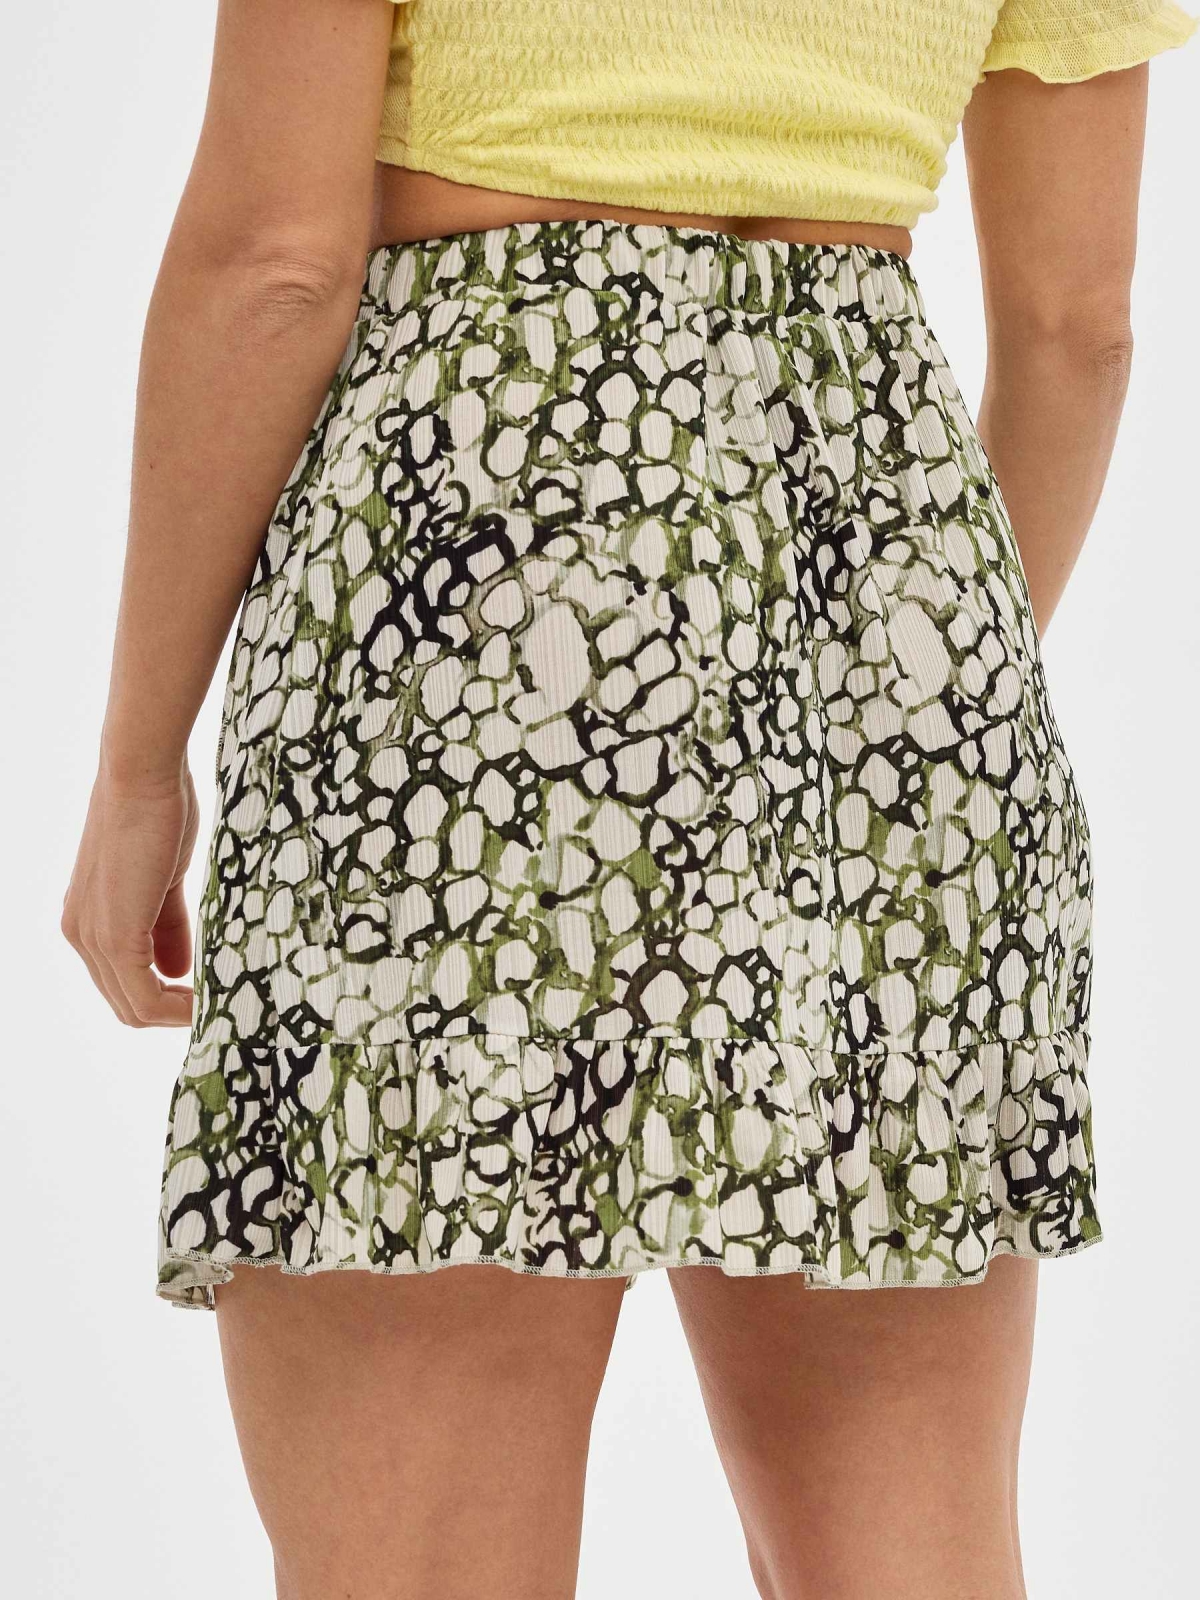 Mini print skirt with ruffle multicolor detail view